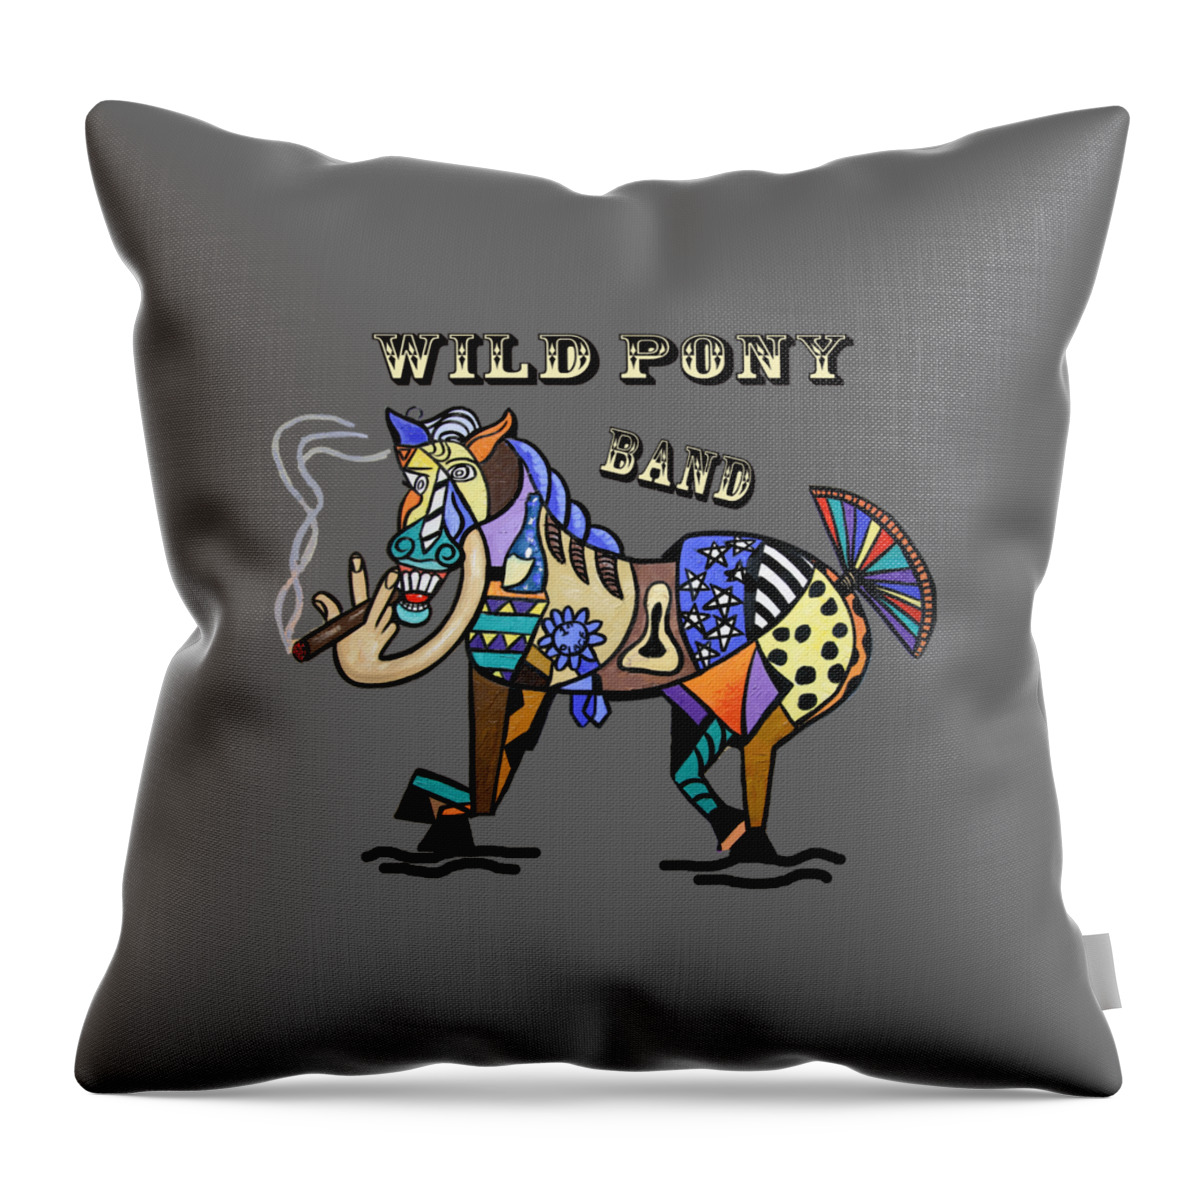 Wild Pony T-shirt Throw Pillow featuring the painting Wild Pony by Anthony Falbo